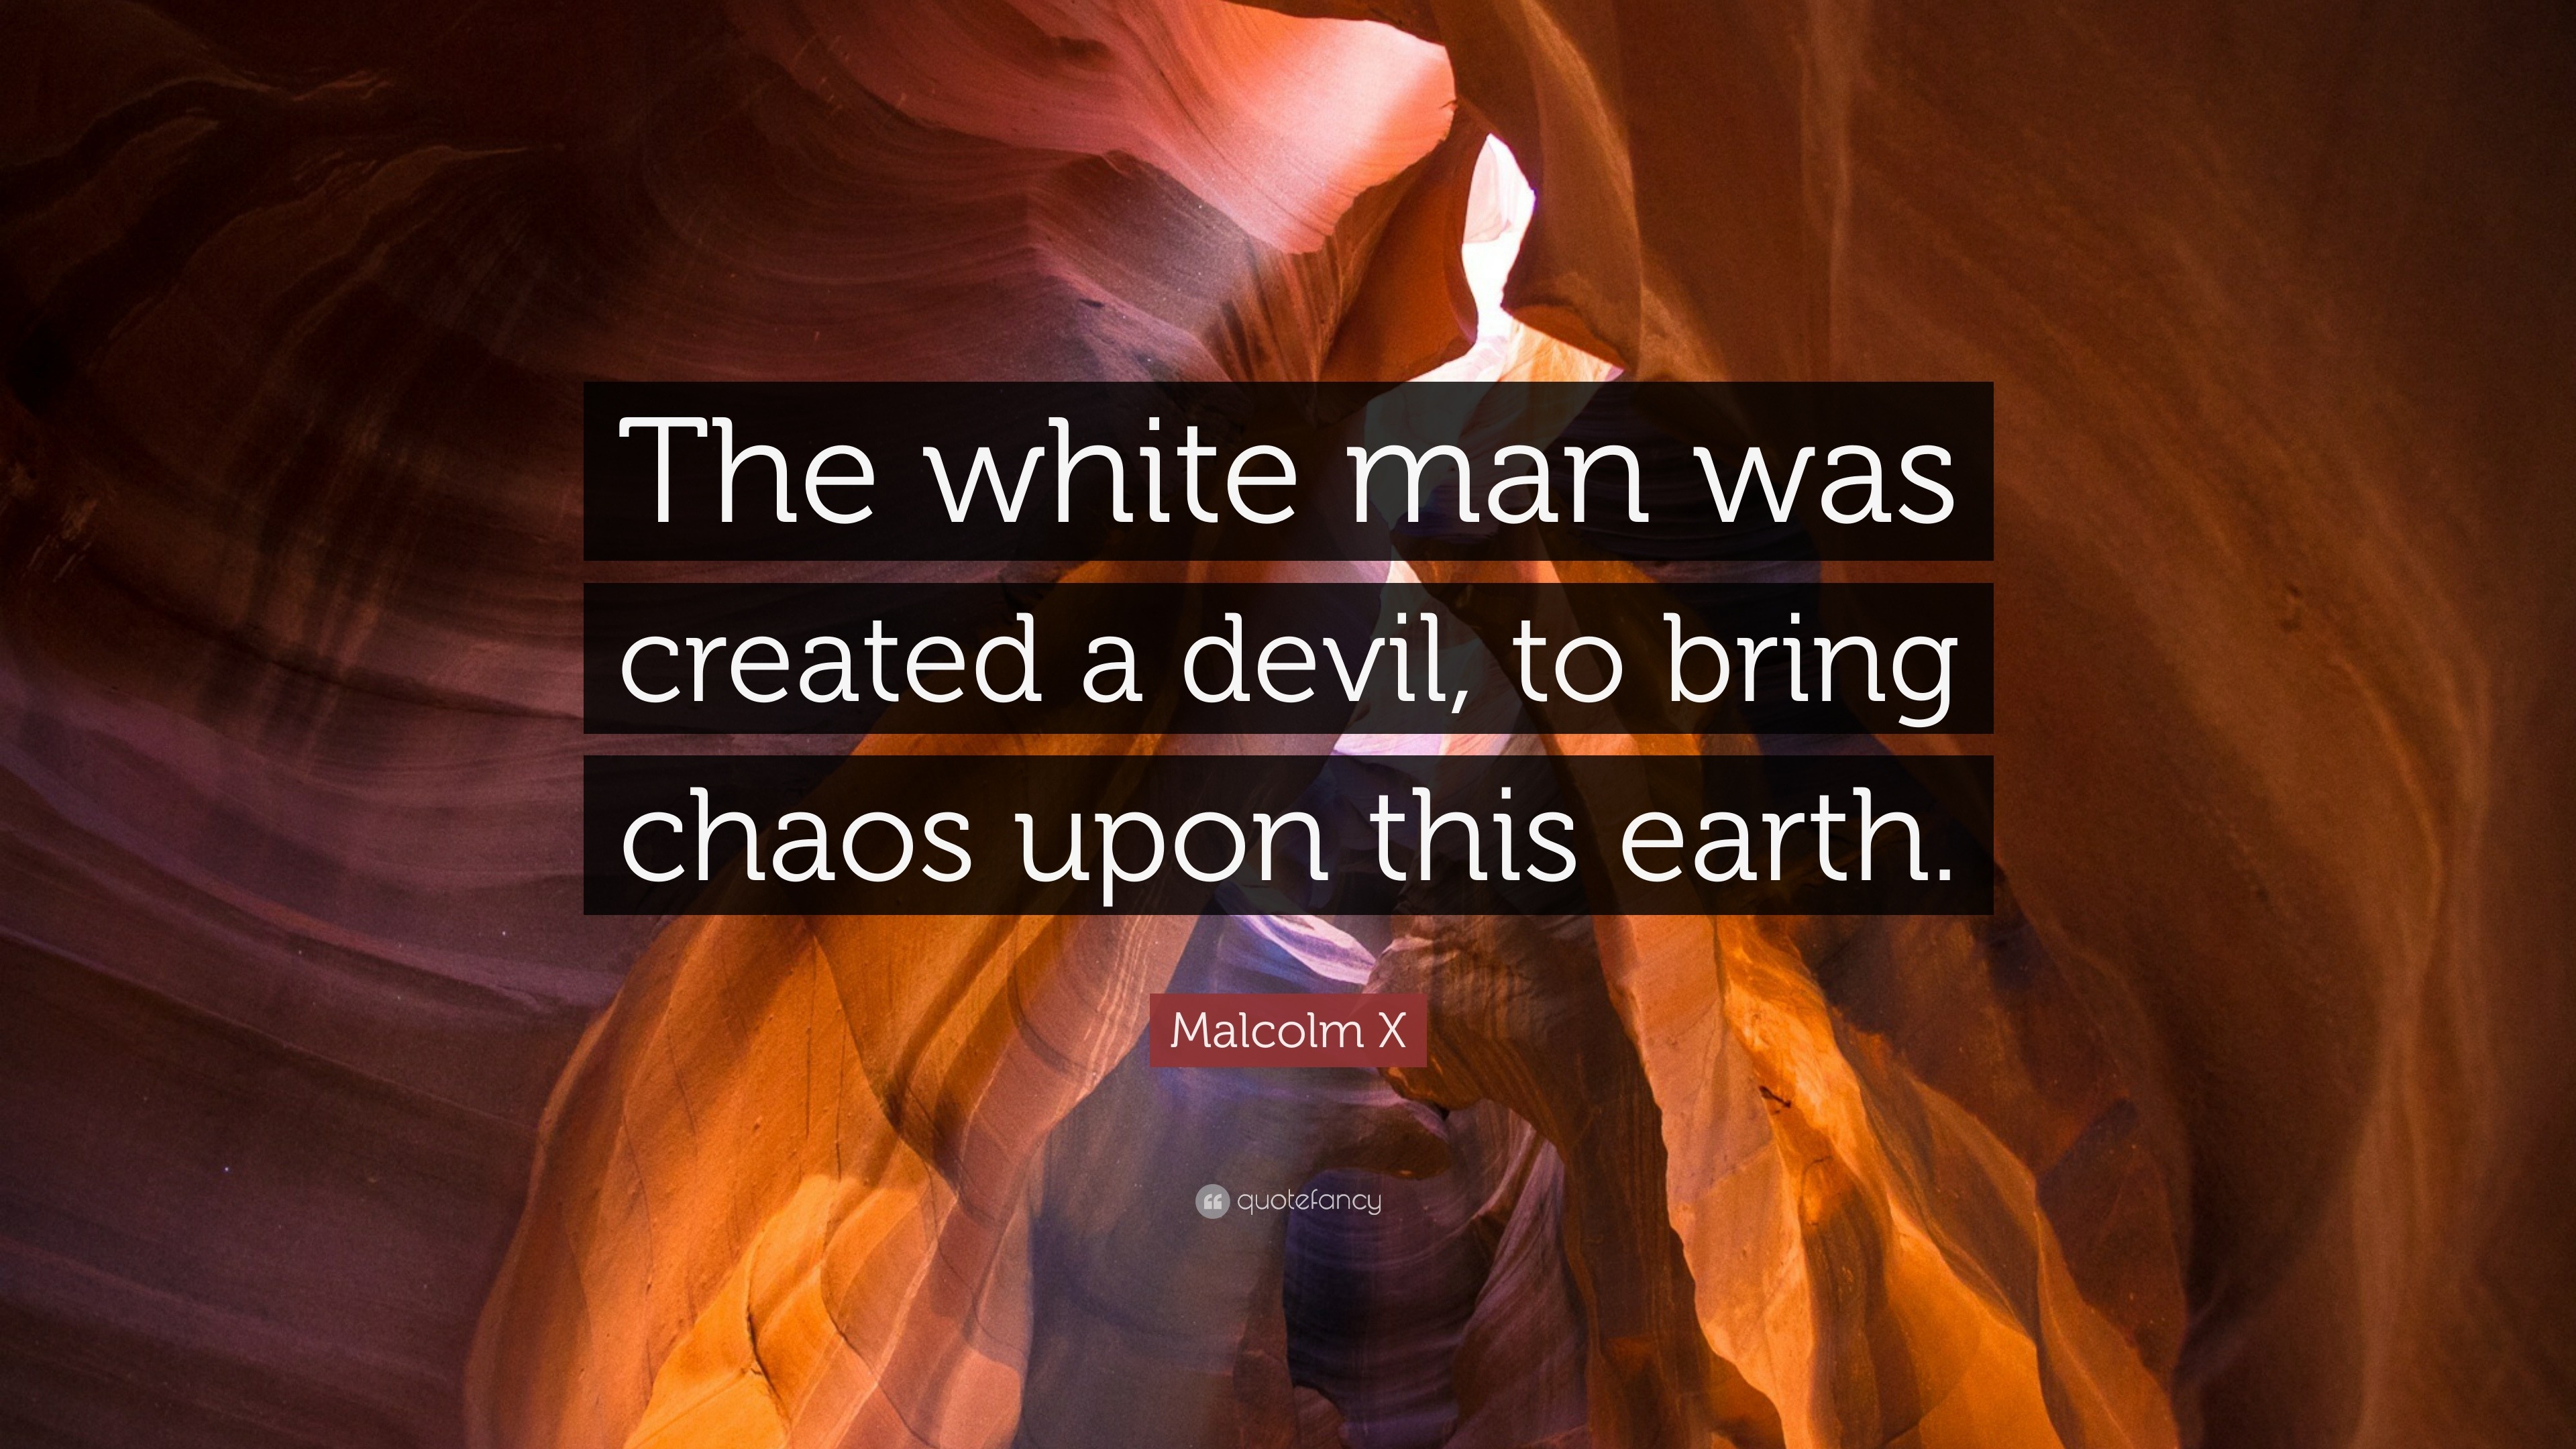 413228-Malcolm-X-Quote-The-white-man-was-created-a-devil-to-bring-chaos.jpg